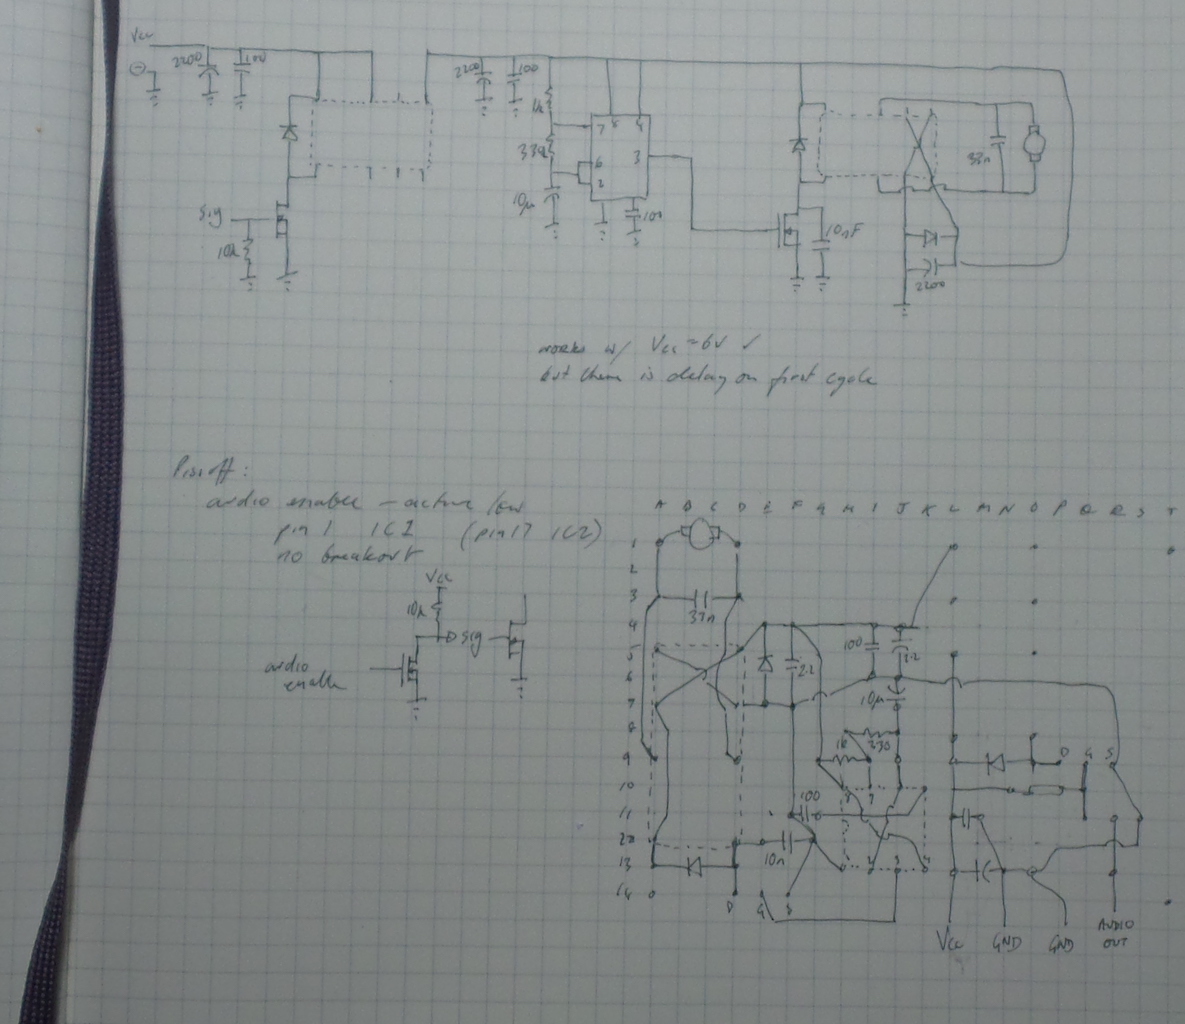 SpiderBot_protoboard_layout